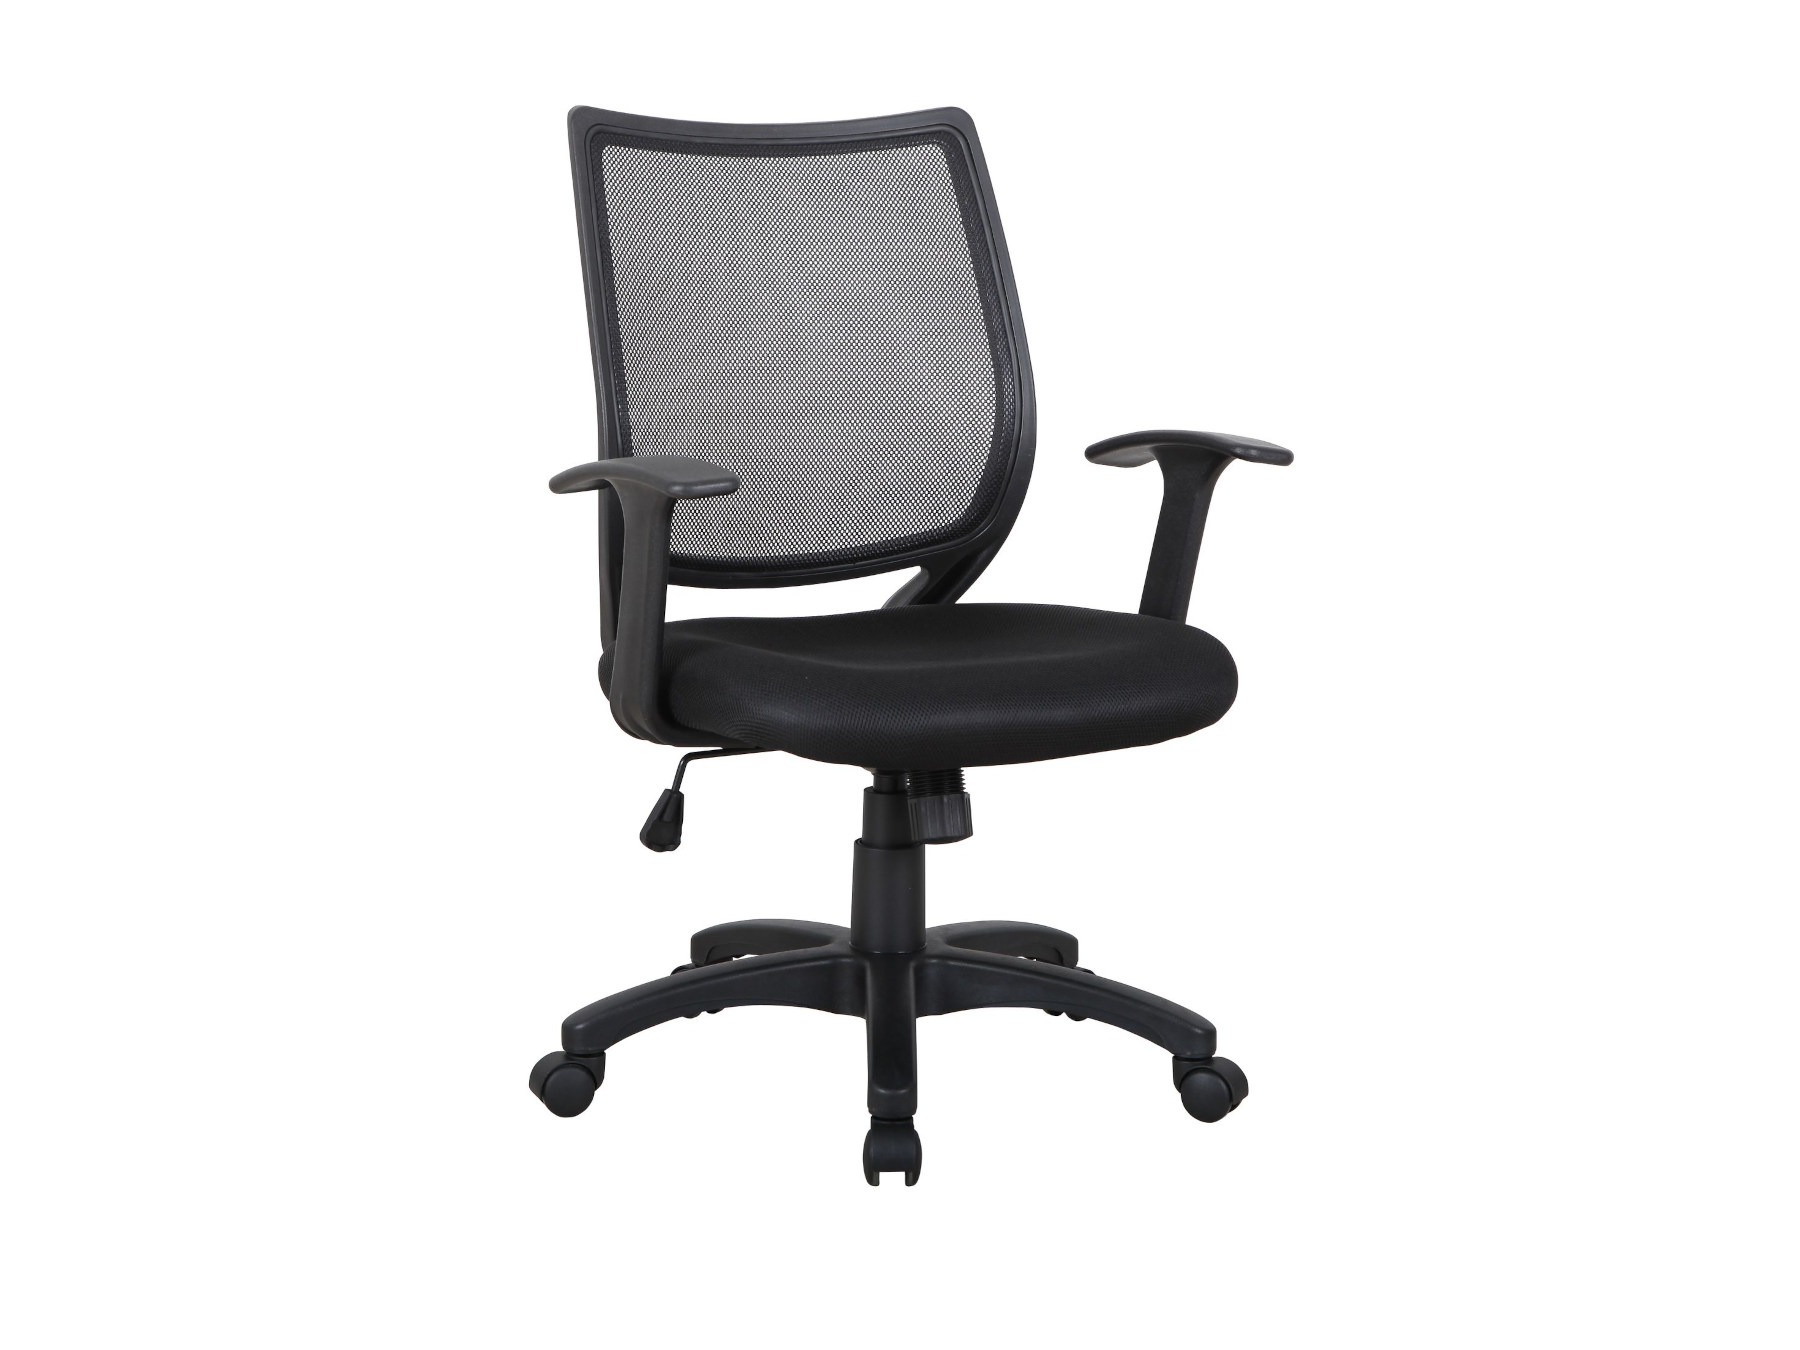 24672 - Office Chair - BX-1490 - Black - Angled